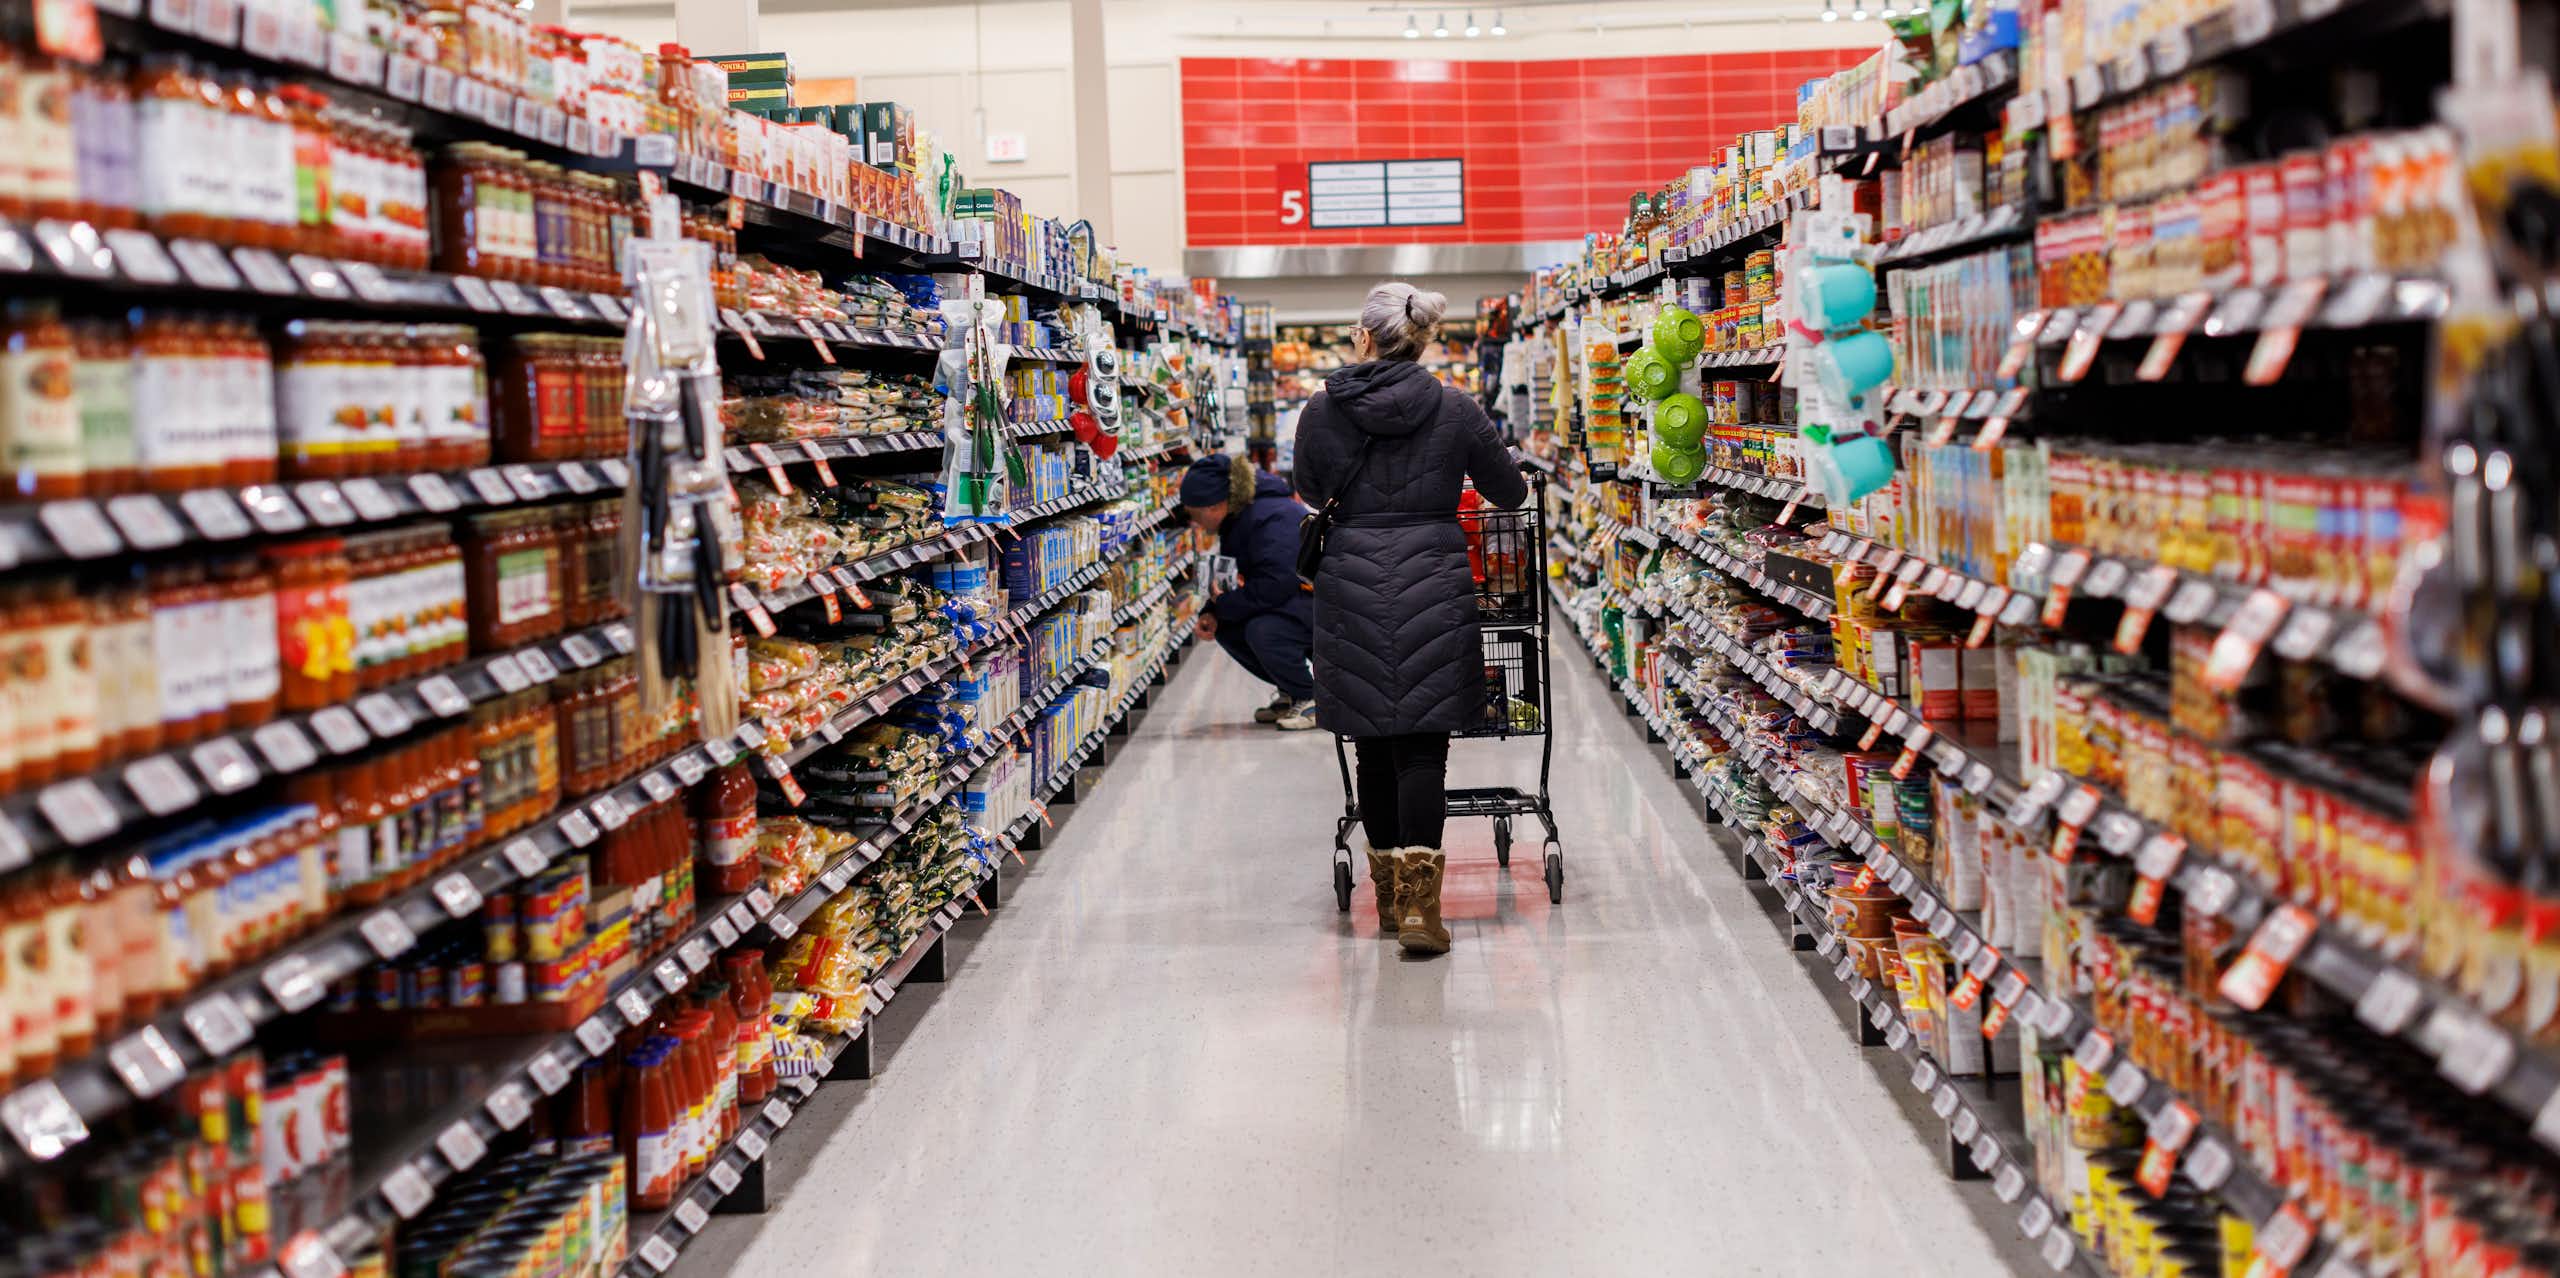 A person seen from behind pushing a grocery cart down an aisle in a supermarket